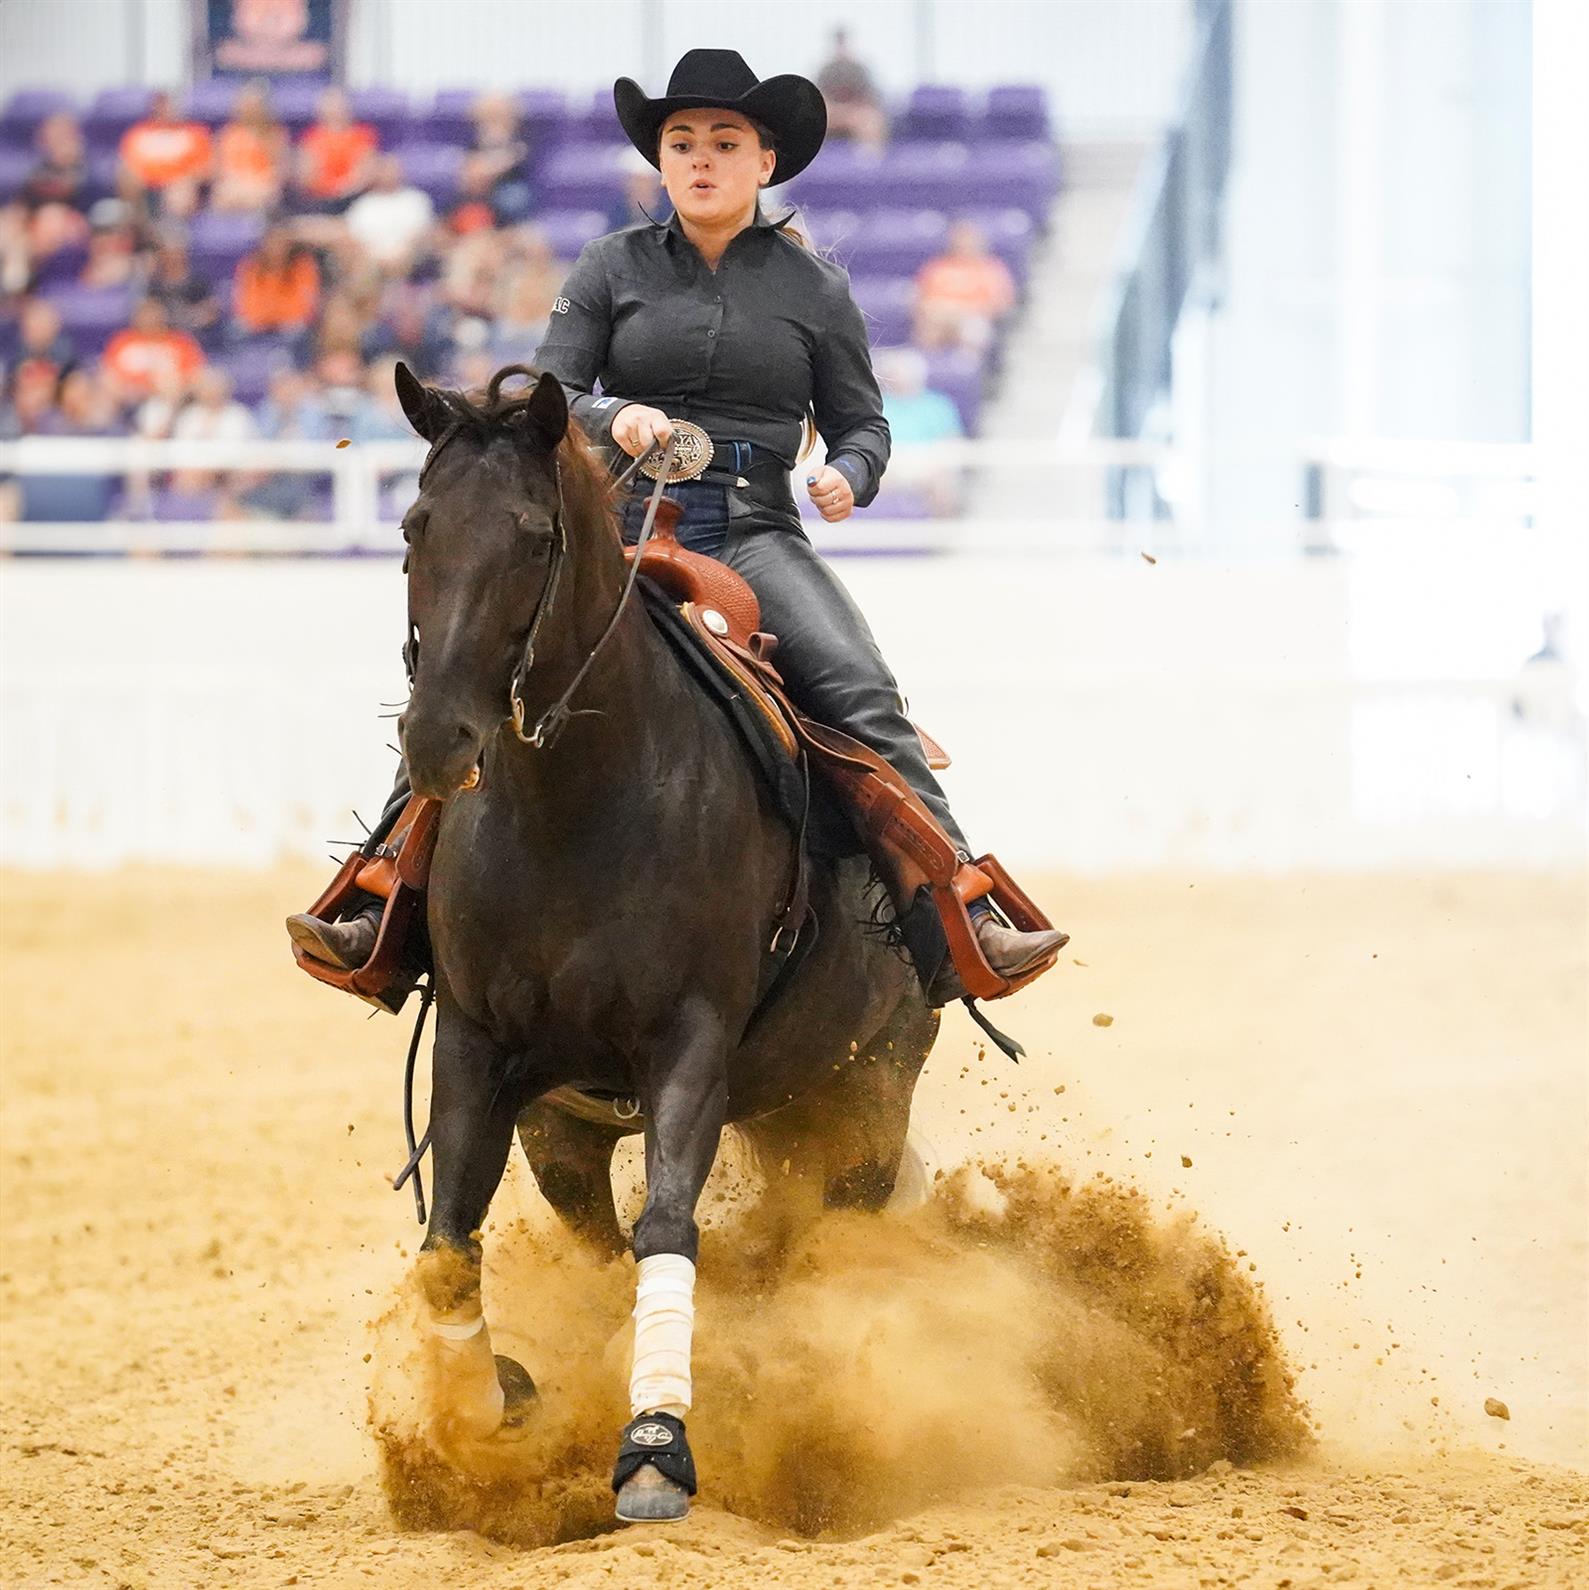 A reining competitor performing a sliding stop